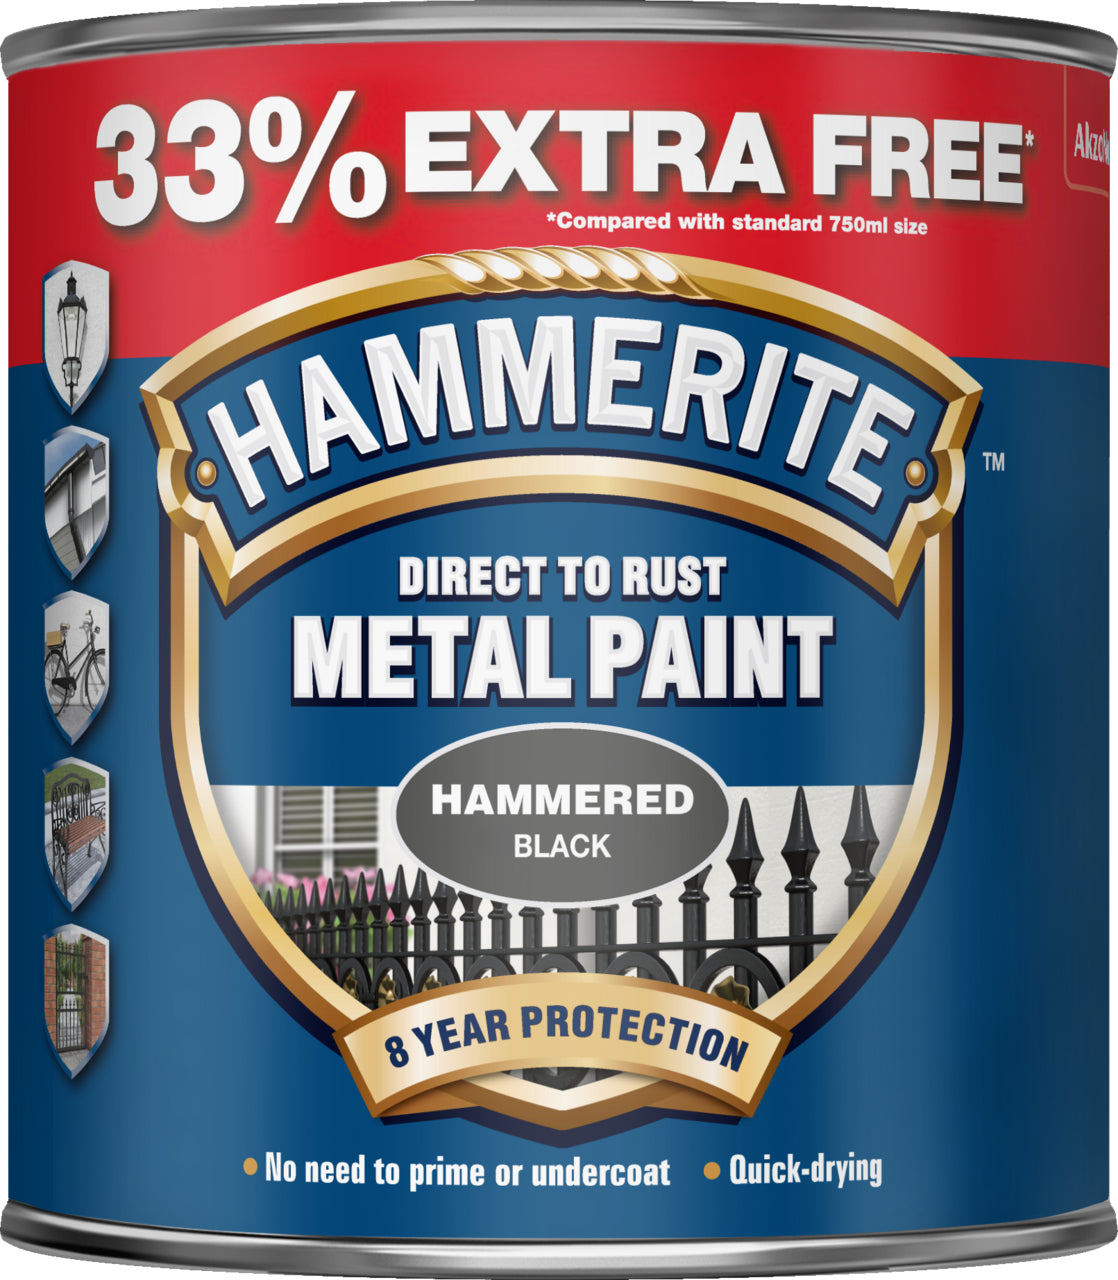 Hammerite Direct To Rust Metal Paint Hammered Finish 1L